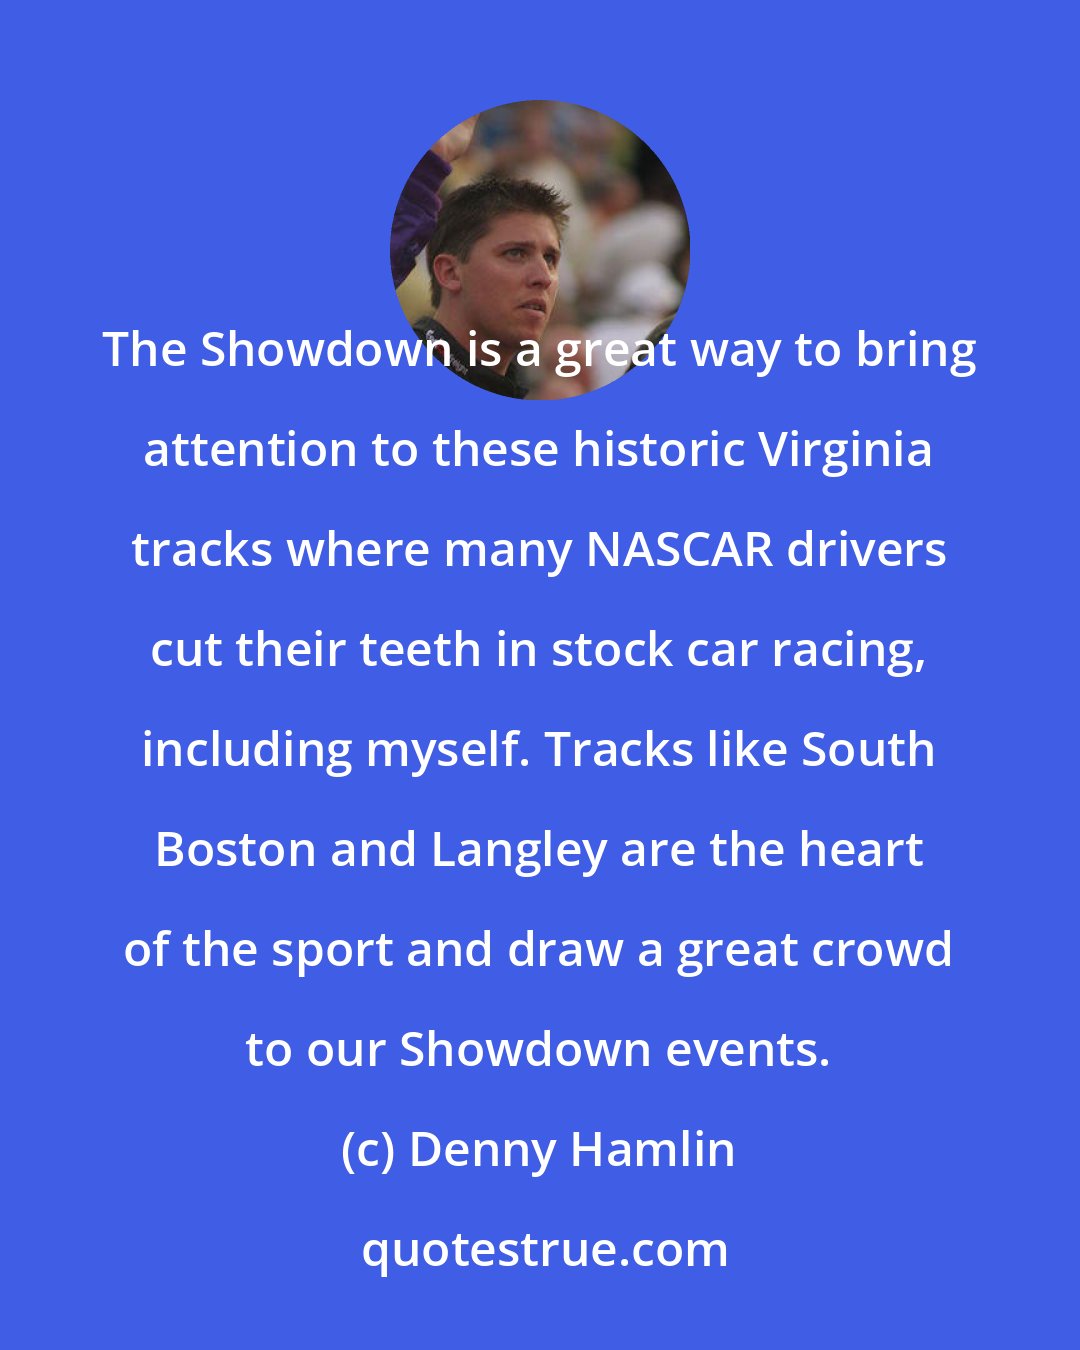 Denny Hamlin: The Showdown is a great way to bring attention to these historic Virginia tracks where many NASCAR drivers cut their teeth in stock car racing, including myself. Tracks like South Boston and Langley are the heart of the sport and draw a great crowd to our Showdown events.